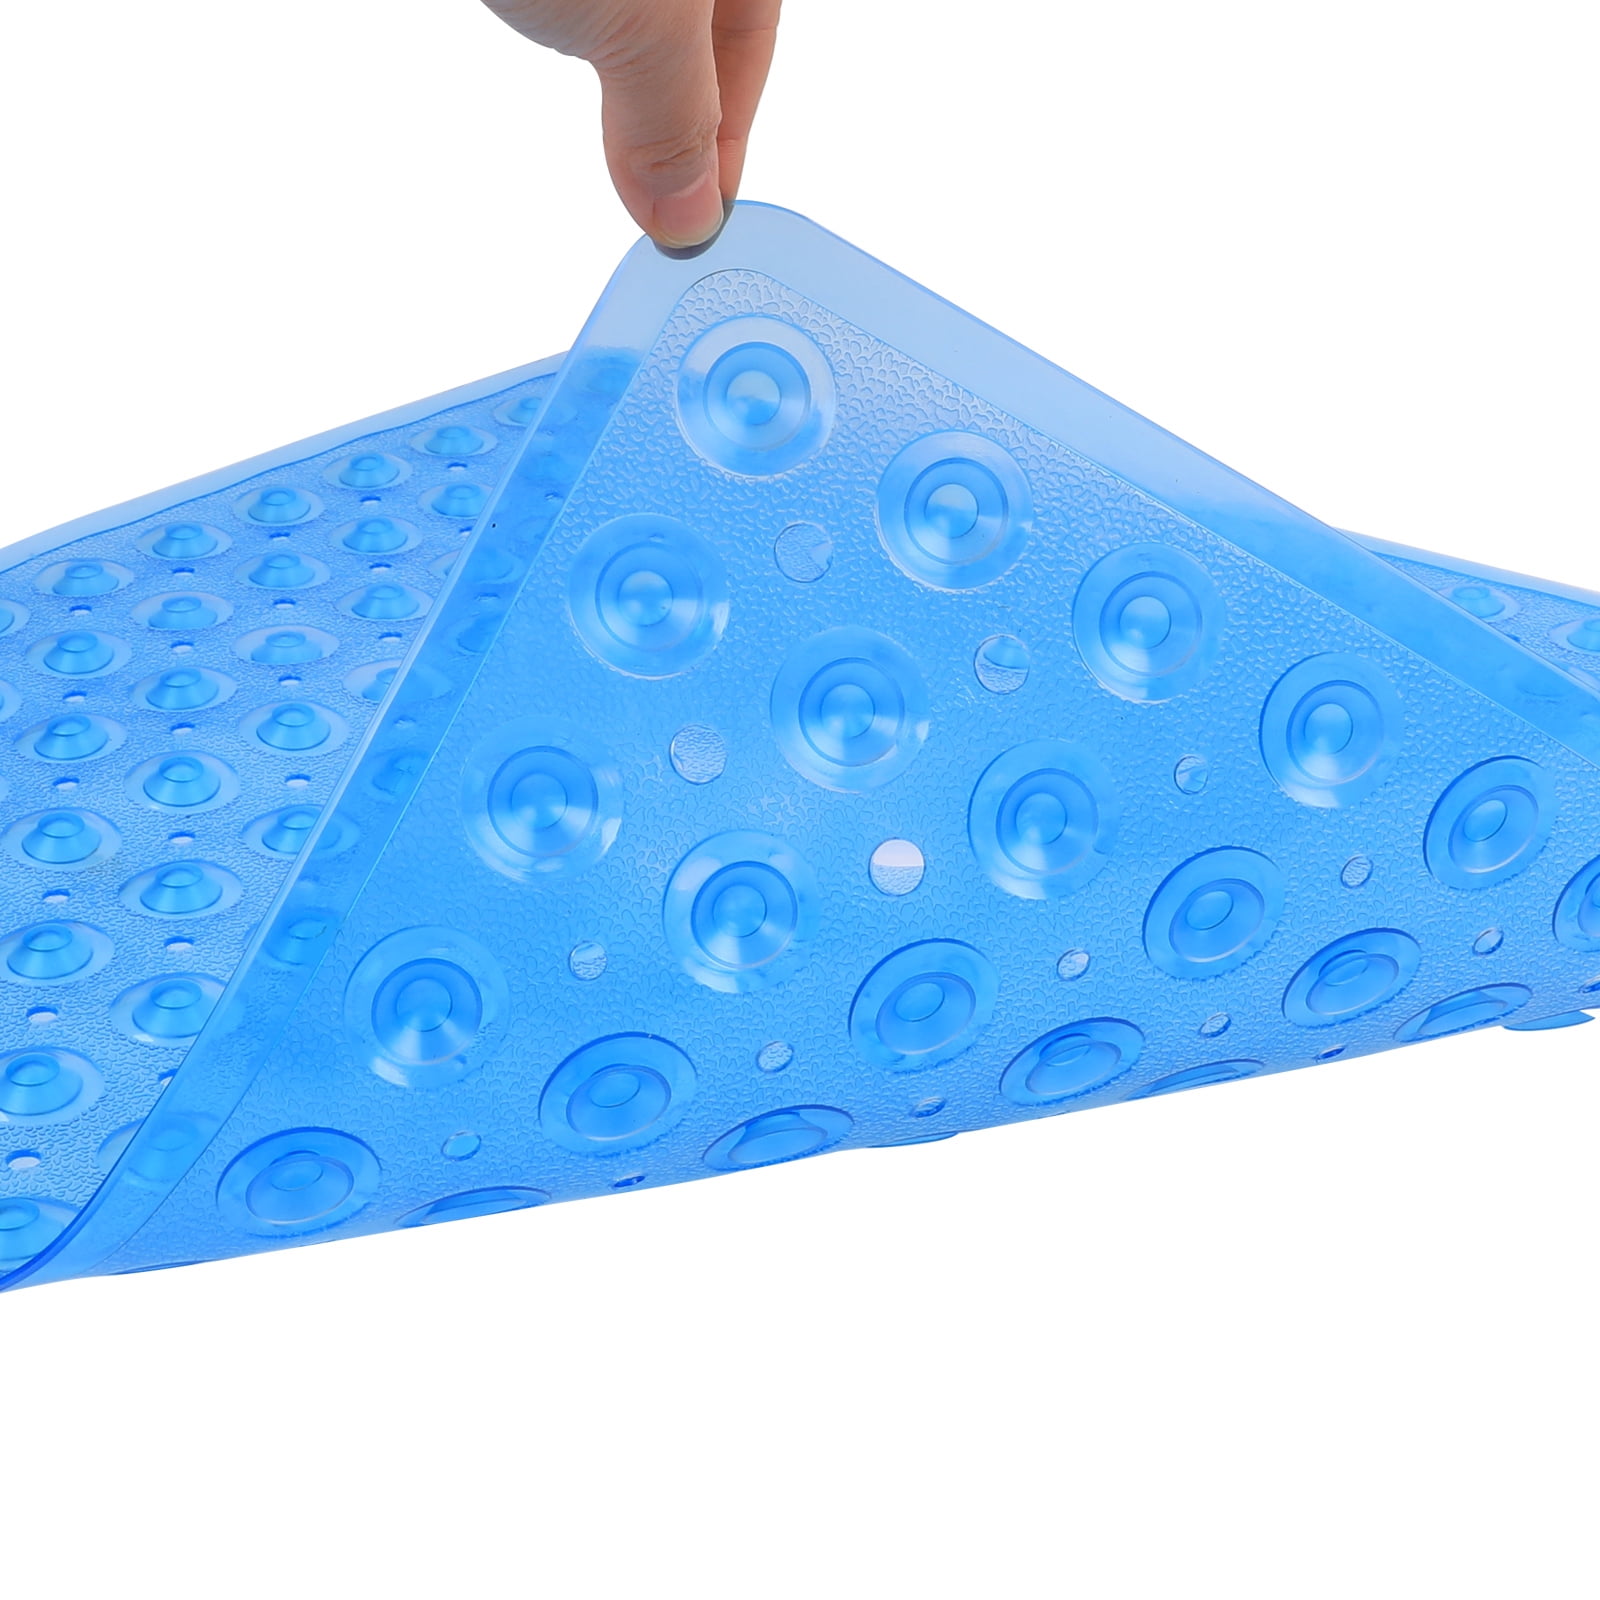 Gorilla Grip Patented Shower and Bathtub Mat, 21x21, Small Square Shower  Stall Floor Mats with Suction Cups and Drainage Holes, Machine Washable and